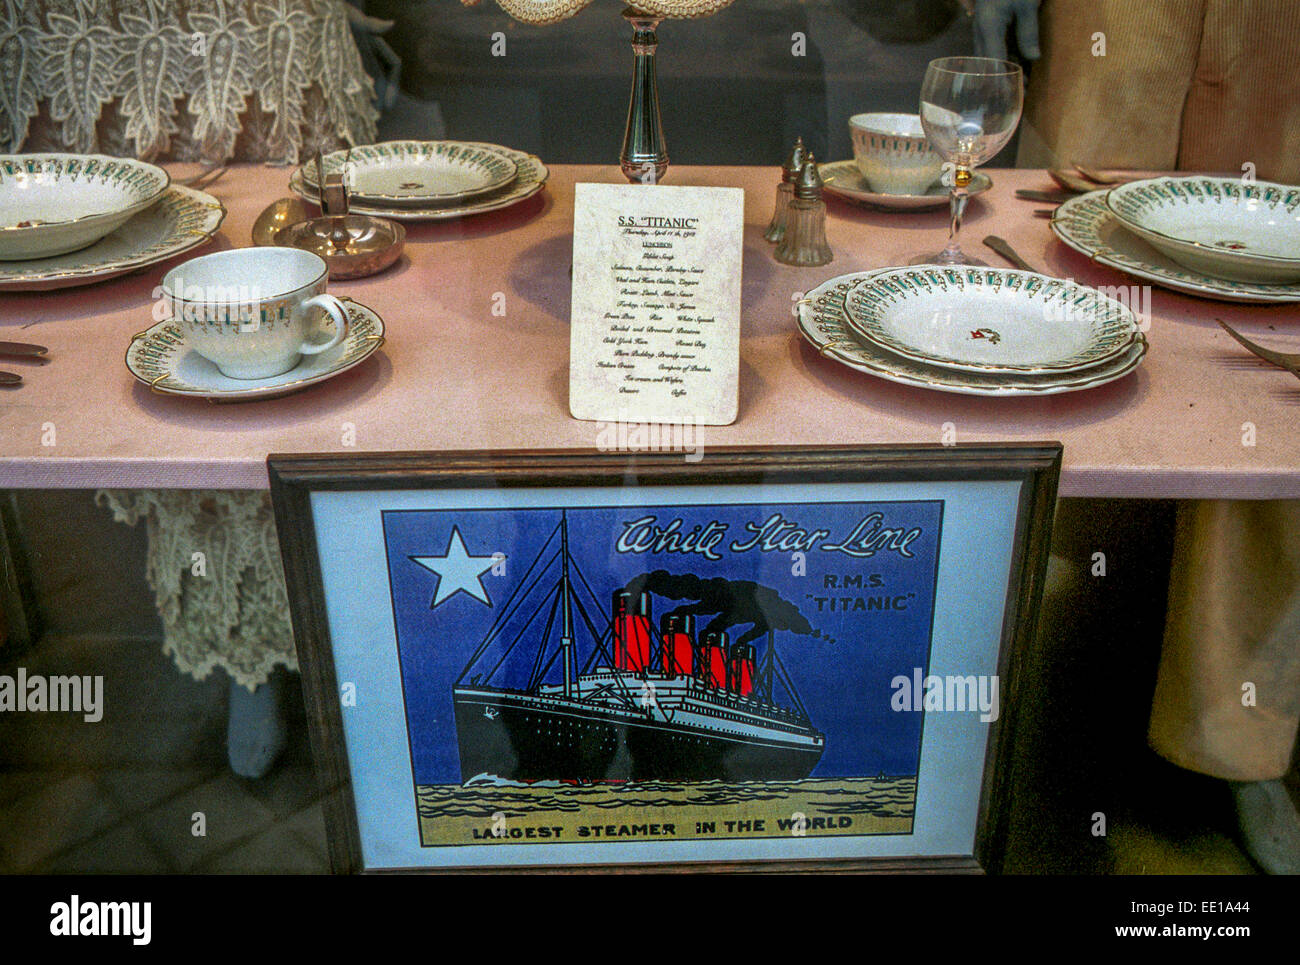 Titanic plate, Kitchen dishes from sunken The Titanic ship. White Star Line, Exposed in the shop window, street of Madrid, Spain Stock Photo